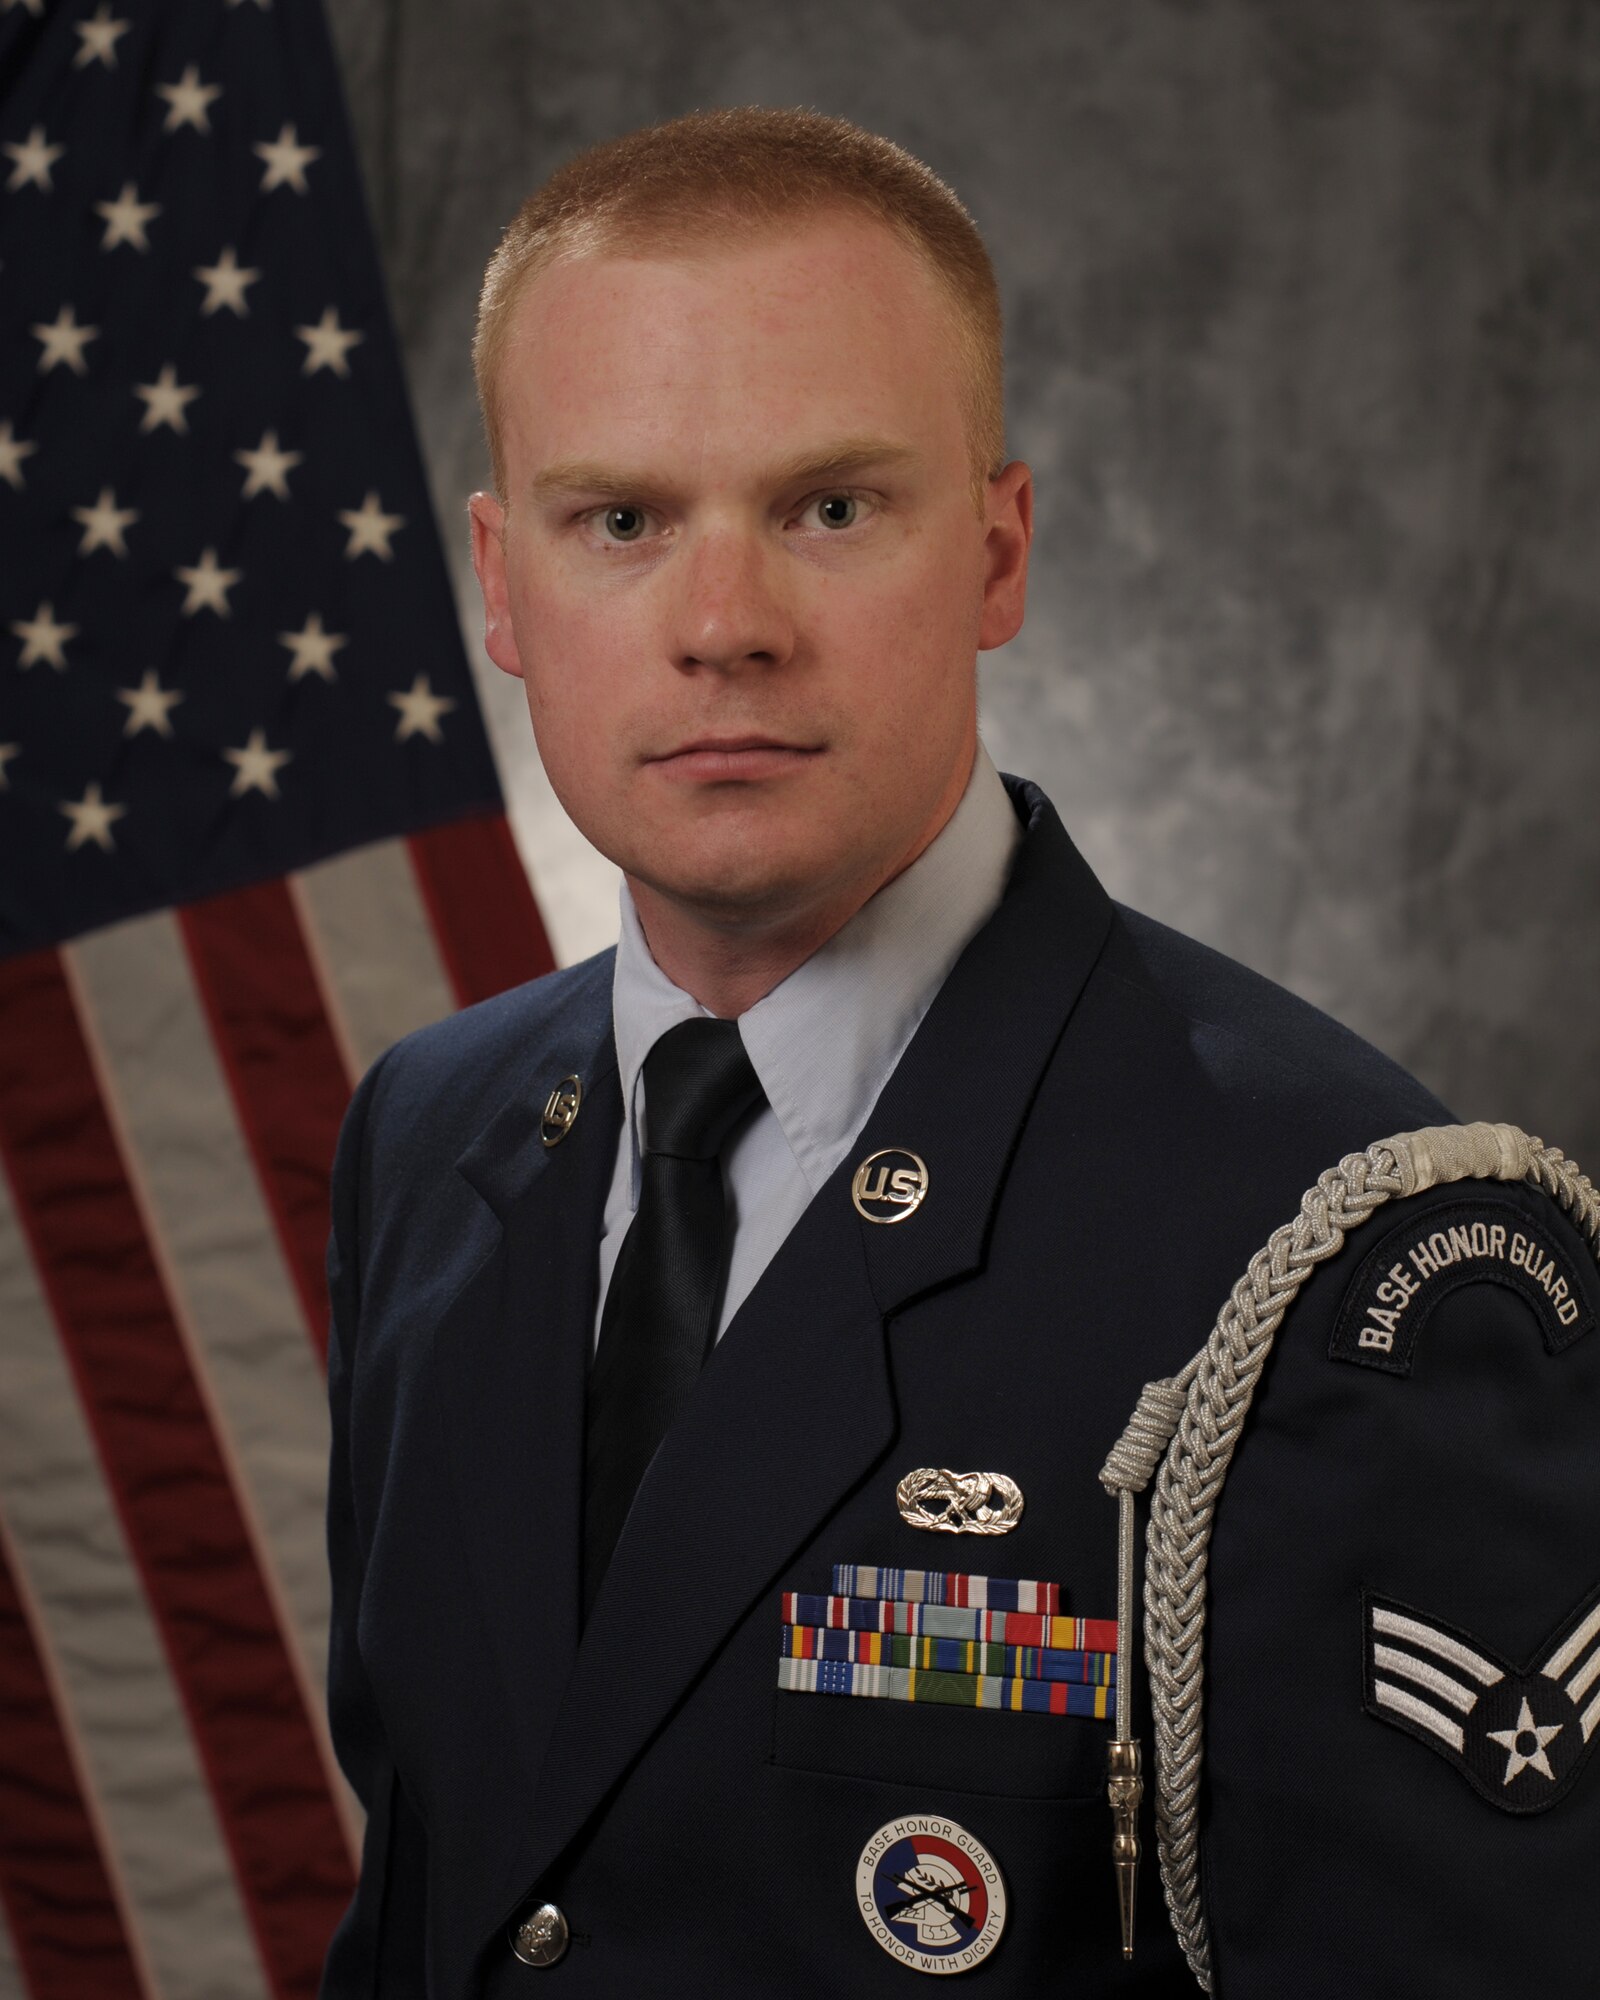 Senior Airman William Evans III, 35th Maintenance Squadron, has been named 5th Air Force's 2016 Base Honor Guard Member of the Year.